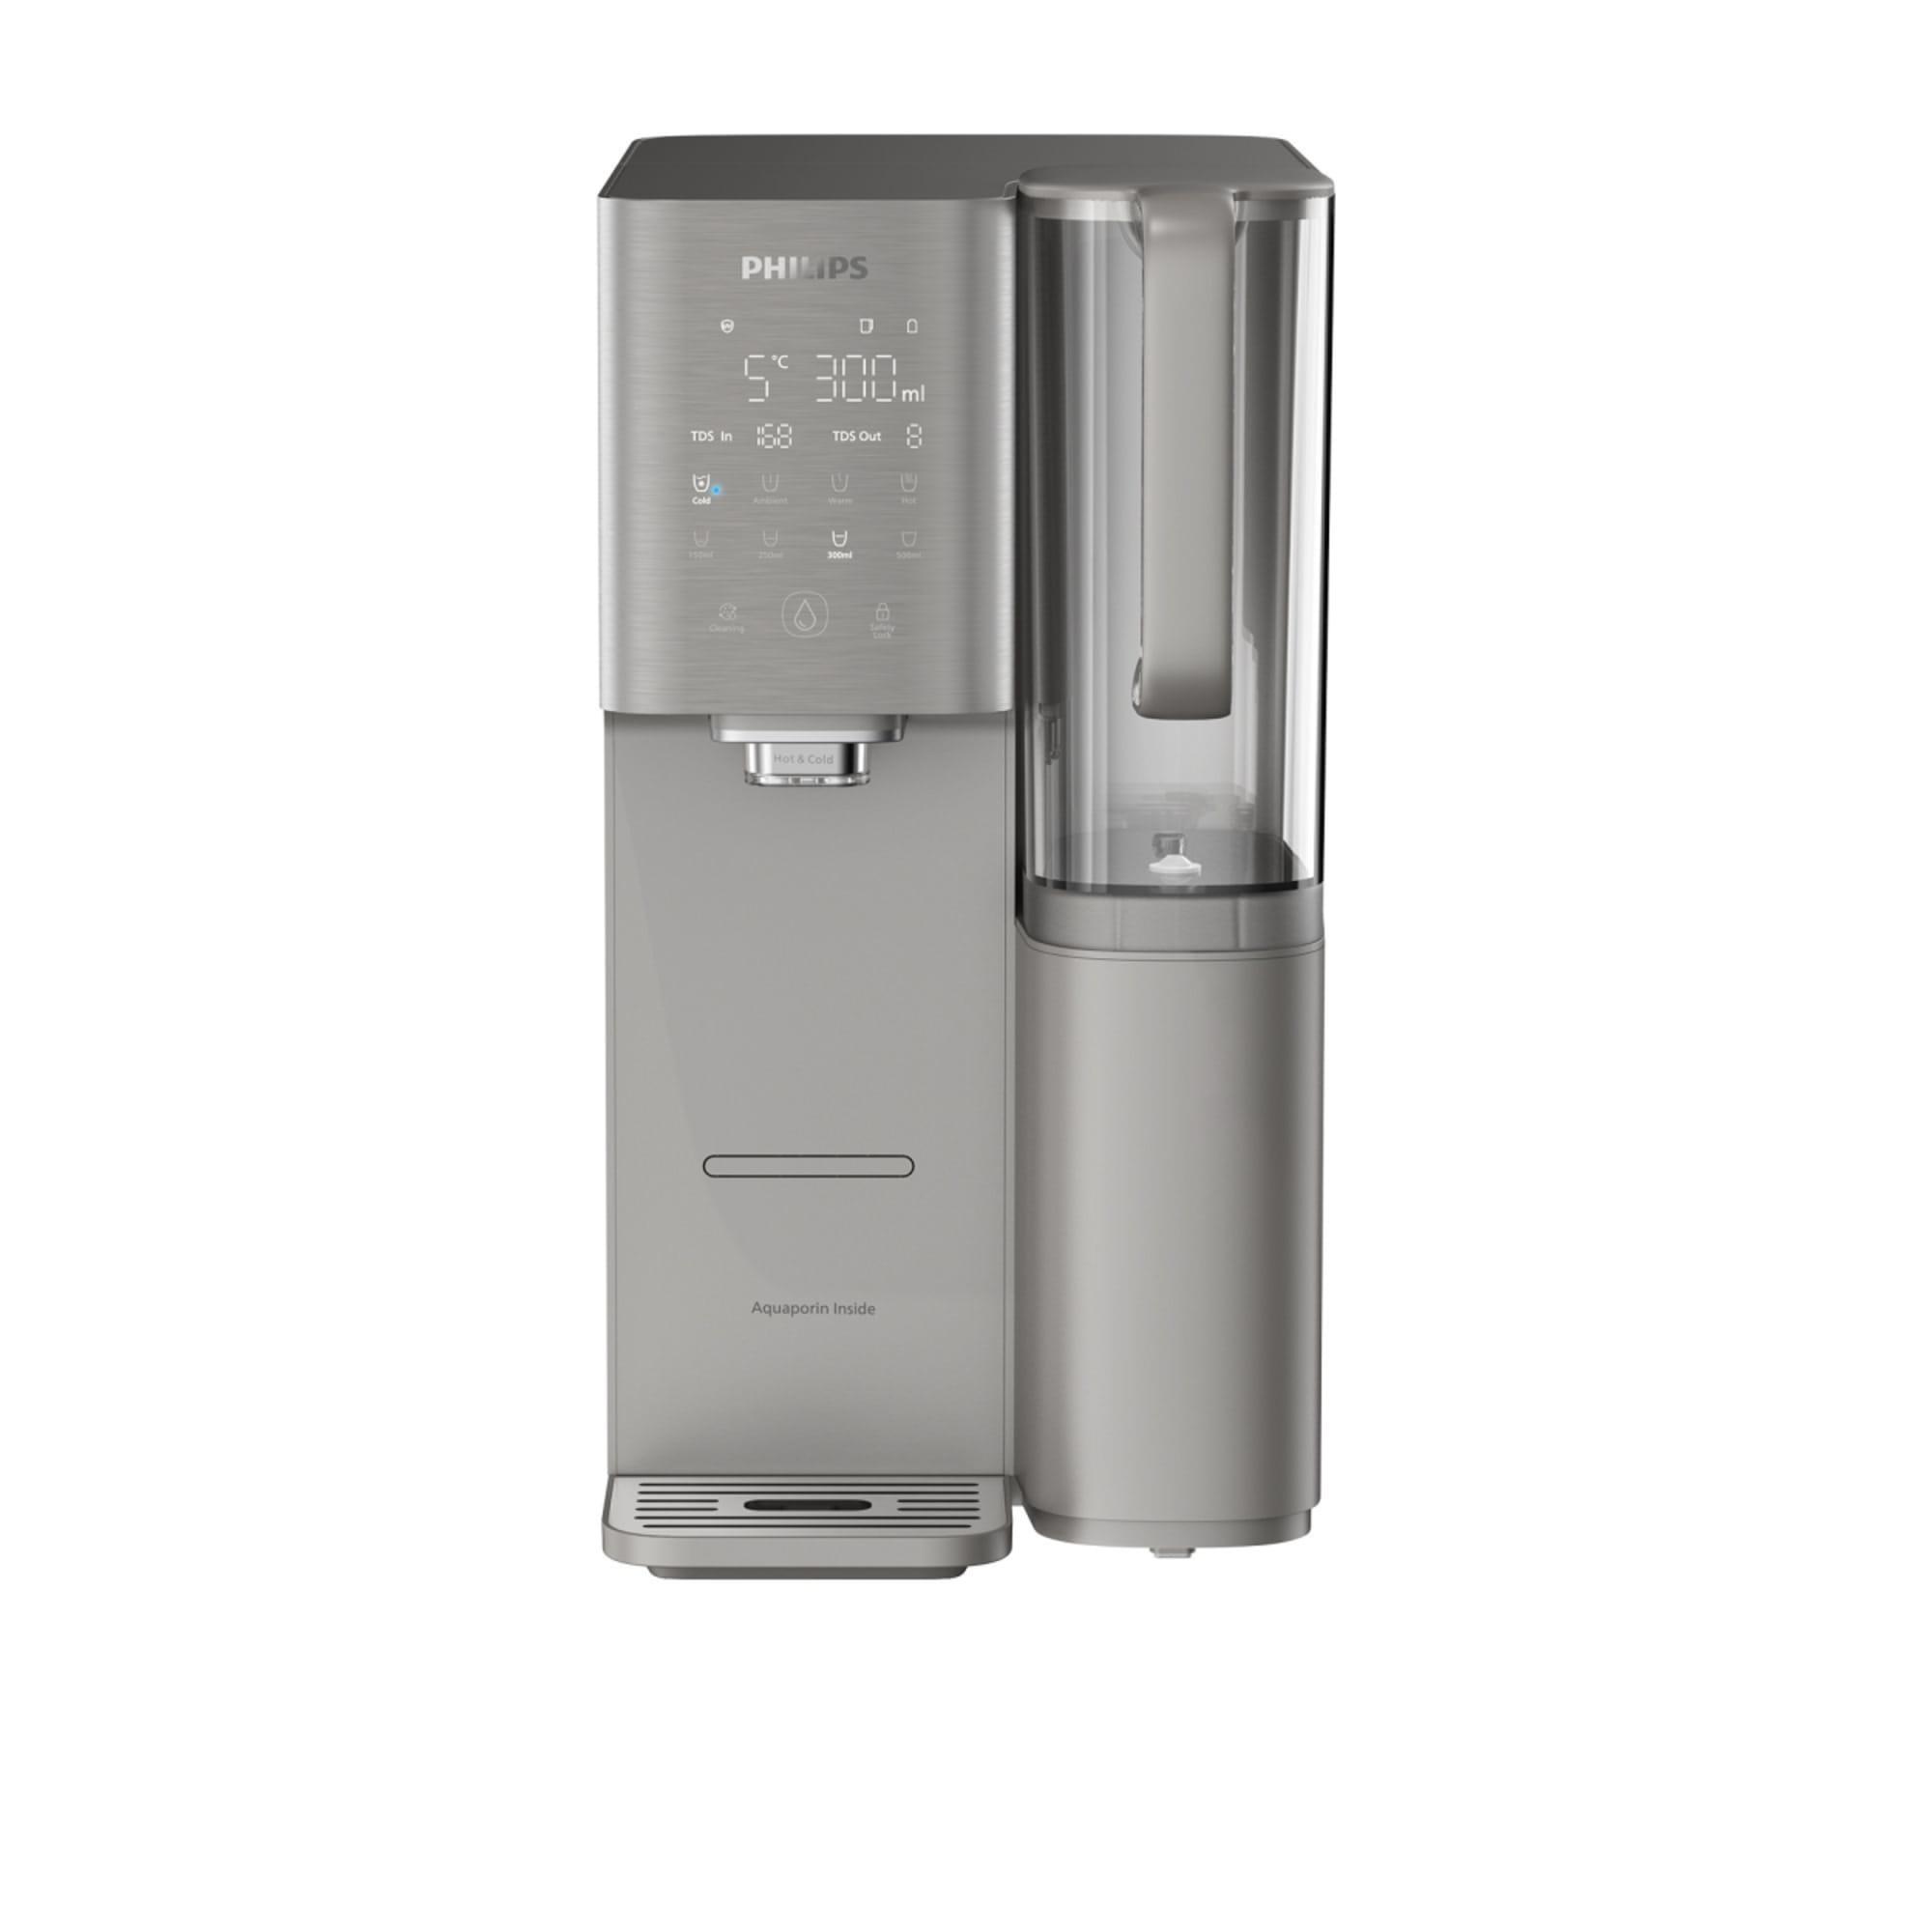 Philips Aquaporin Hot and Cold Water Station 1.8L Image 8